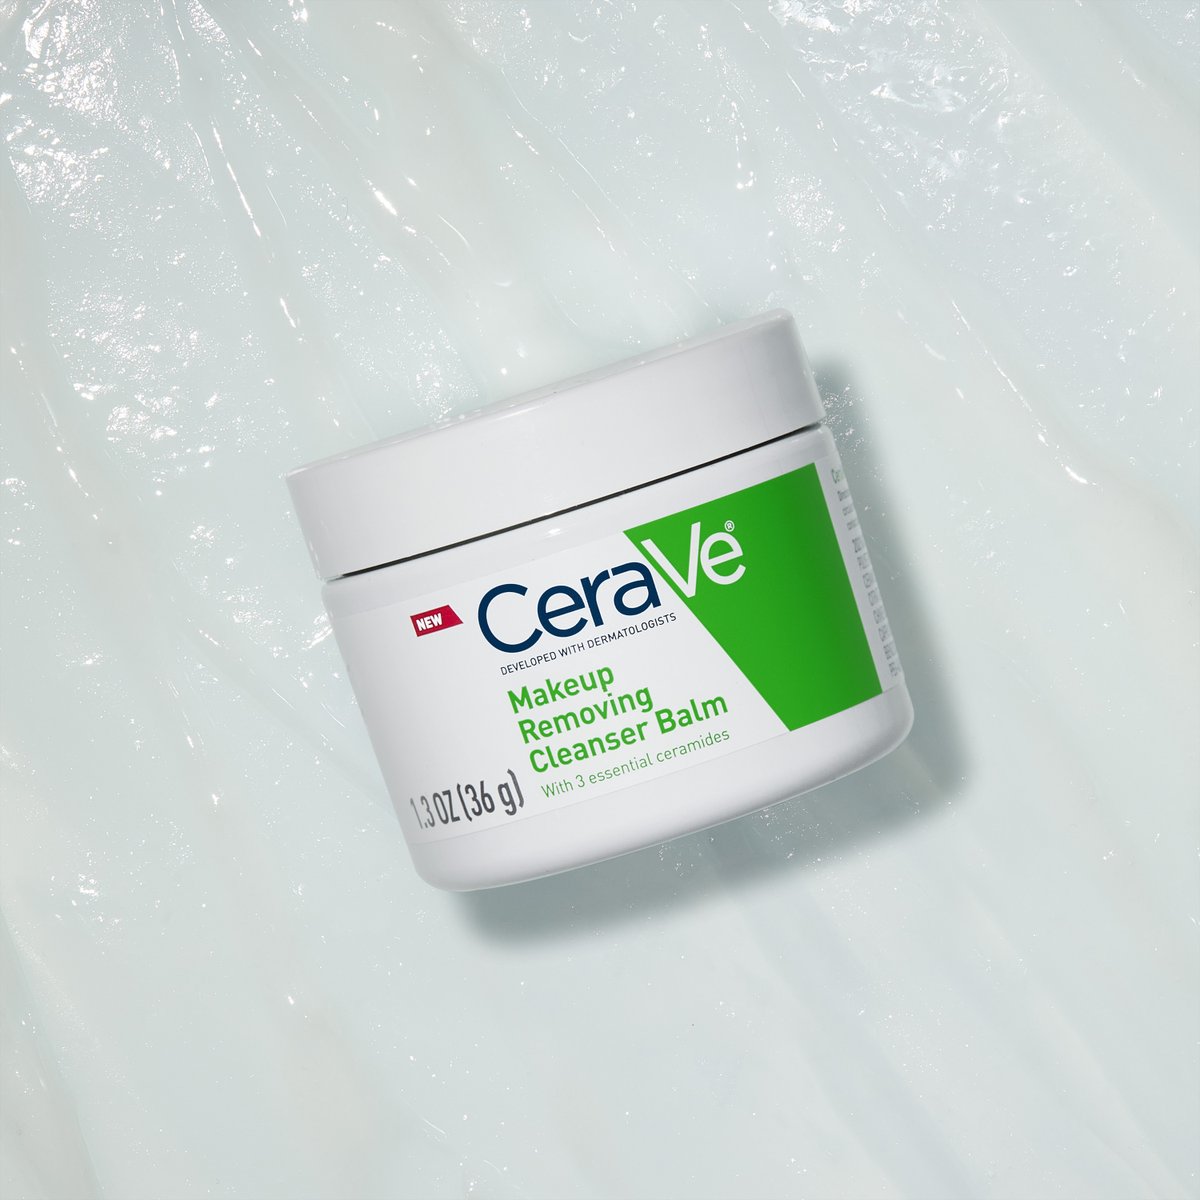 Makeup Removing Cleanser Balm has a velvety texture that works to effectively dissolve longwear makeup, dirt, and excess oil with no greasy residue left on the skin 😊 Which CeraVe product do you use to remove your makeup? #CeraVe #DevelopedWithDerms